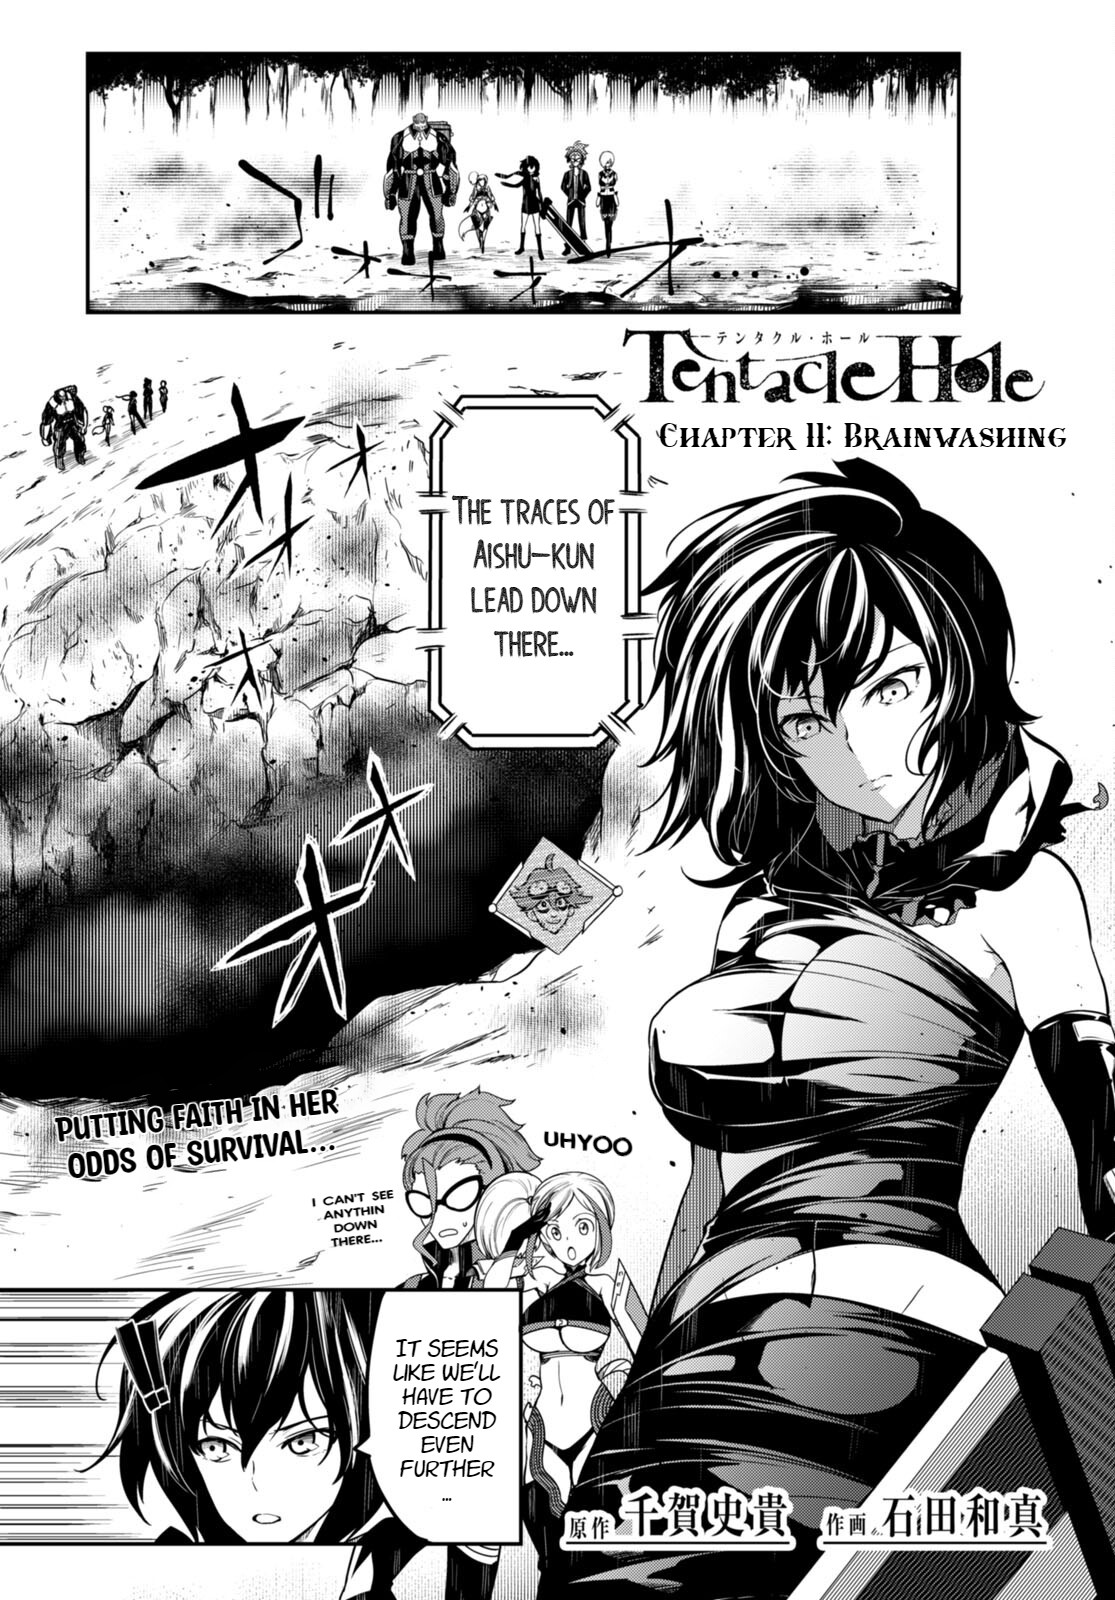 Tentacle Hole Chapter 11 #2